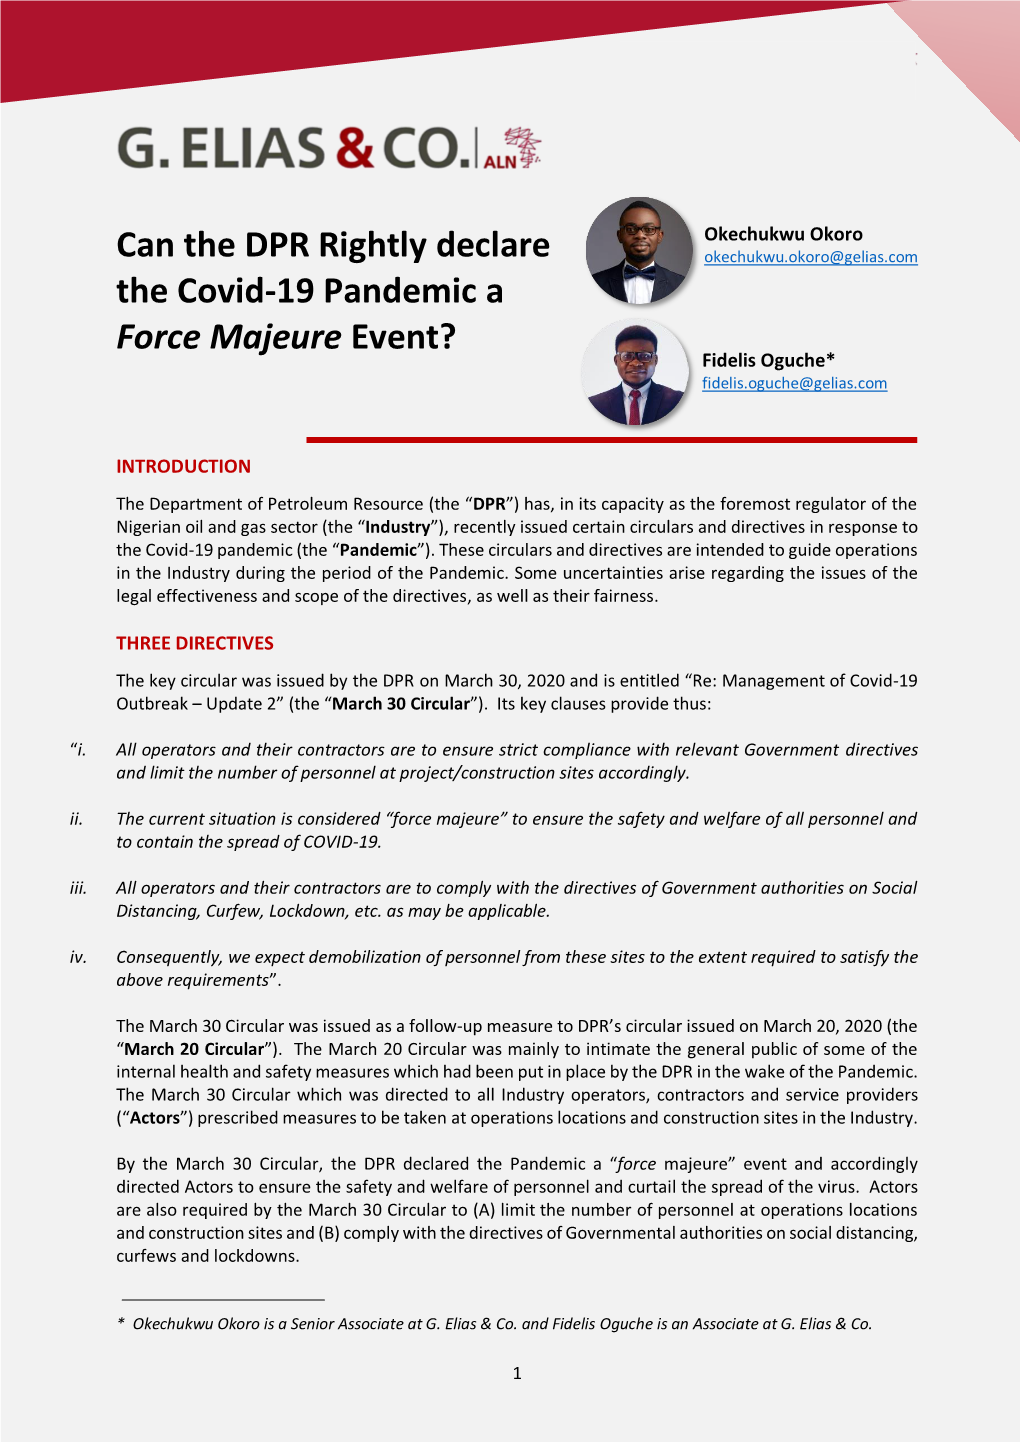 Can the DPR Rightly Declare the Covid-19 Pandemic a Force